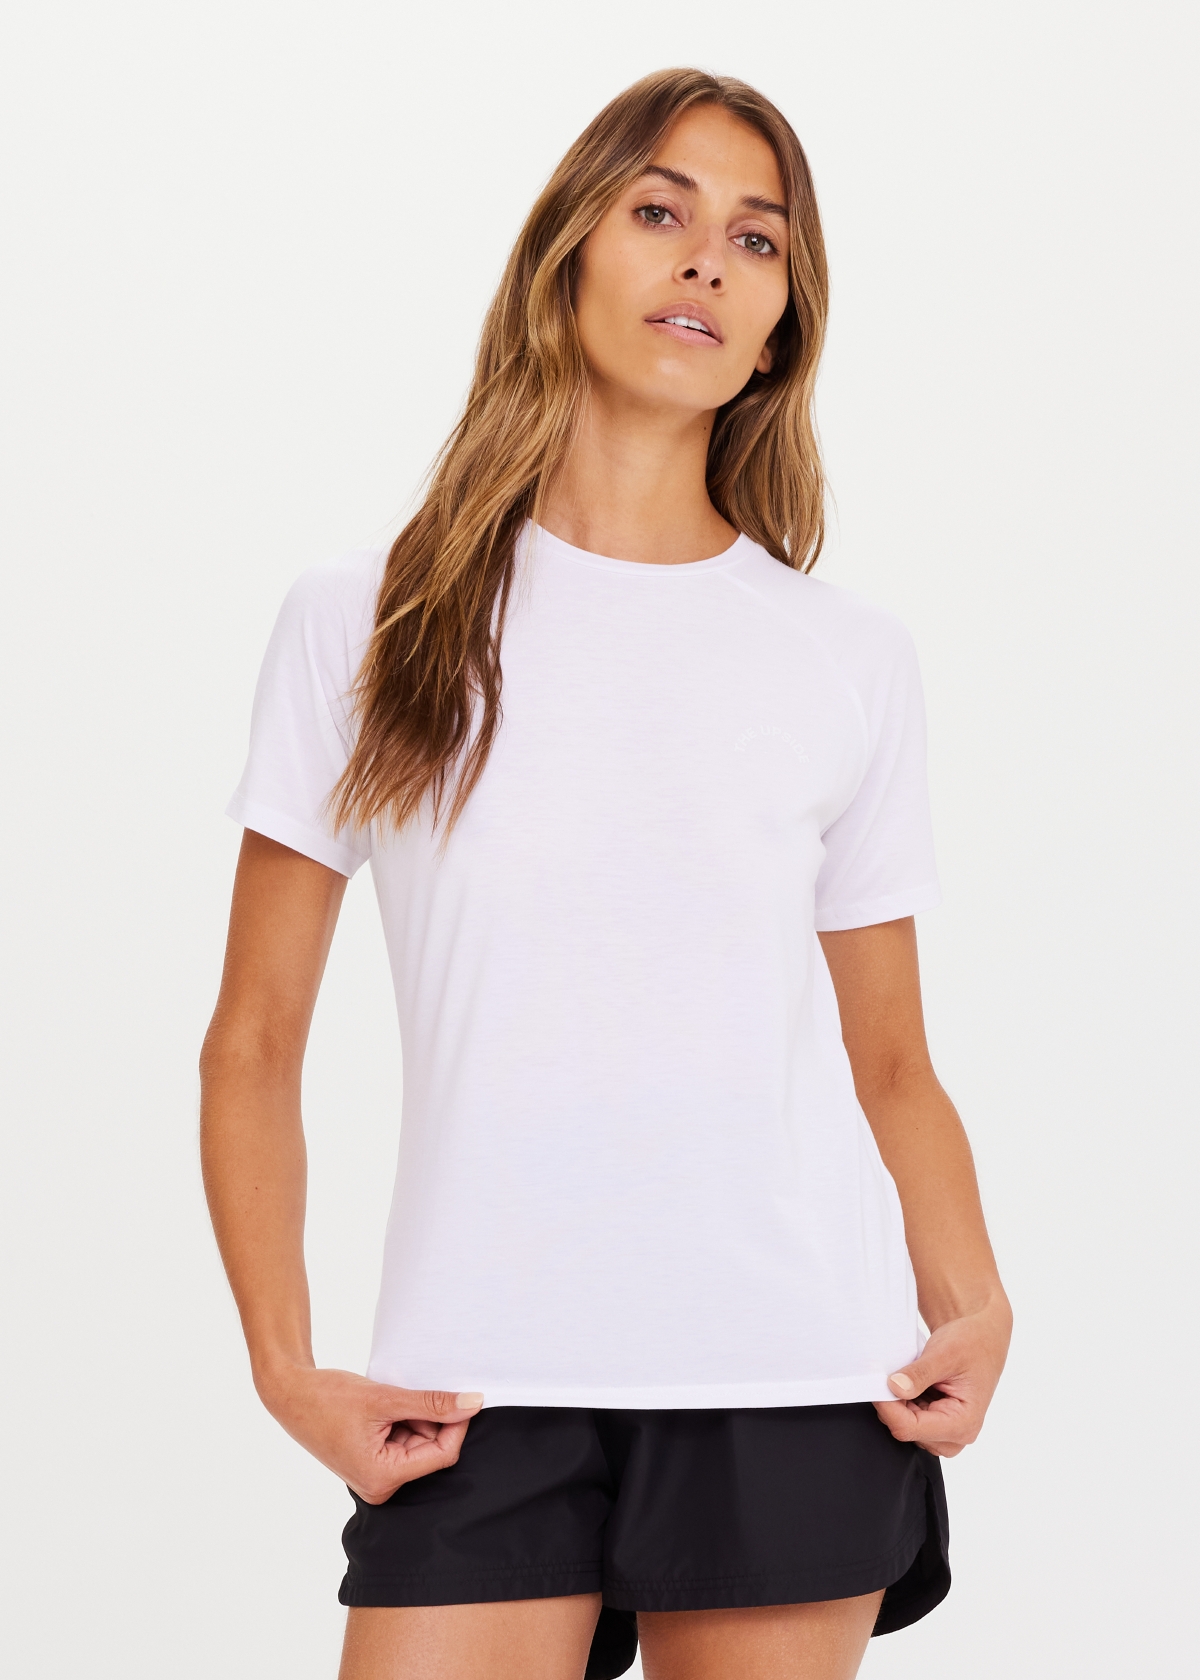 POWER TEE in WHITE | The UPSIDE